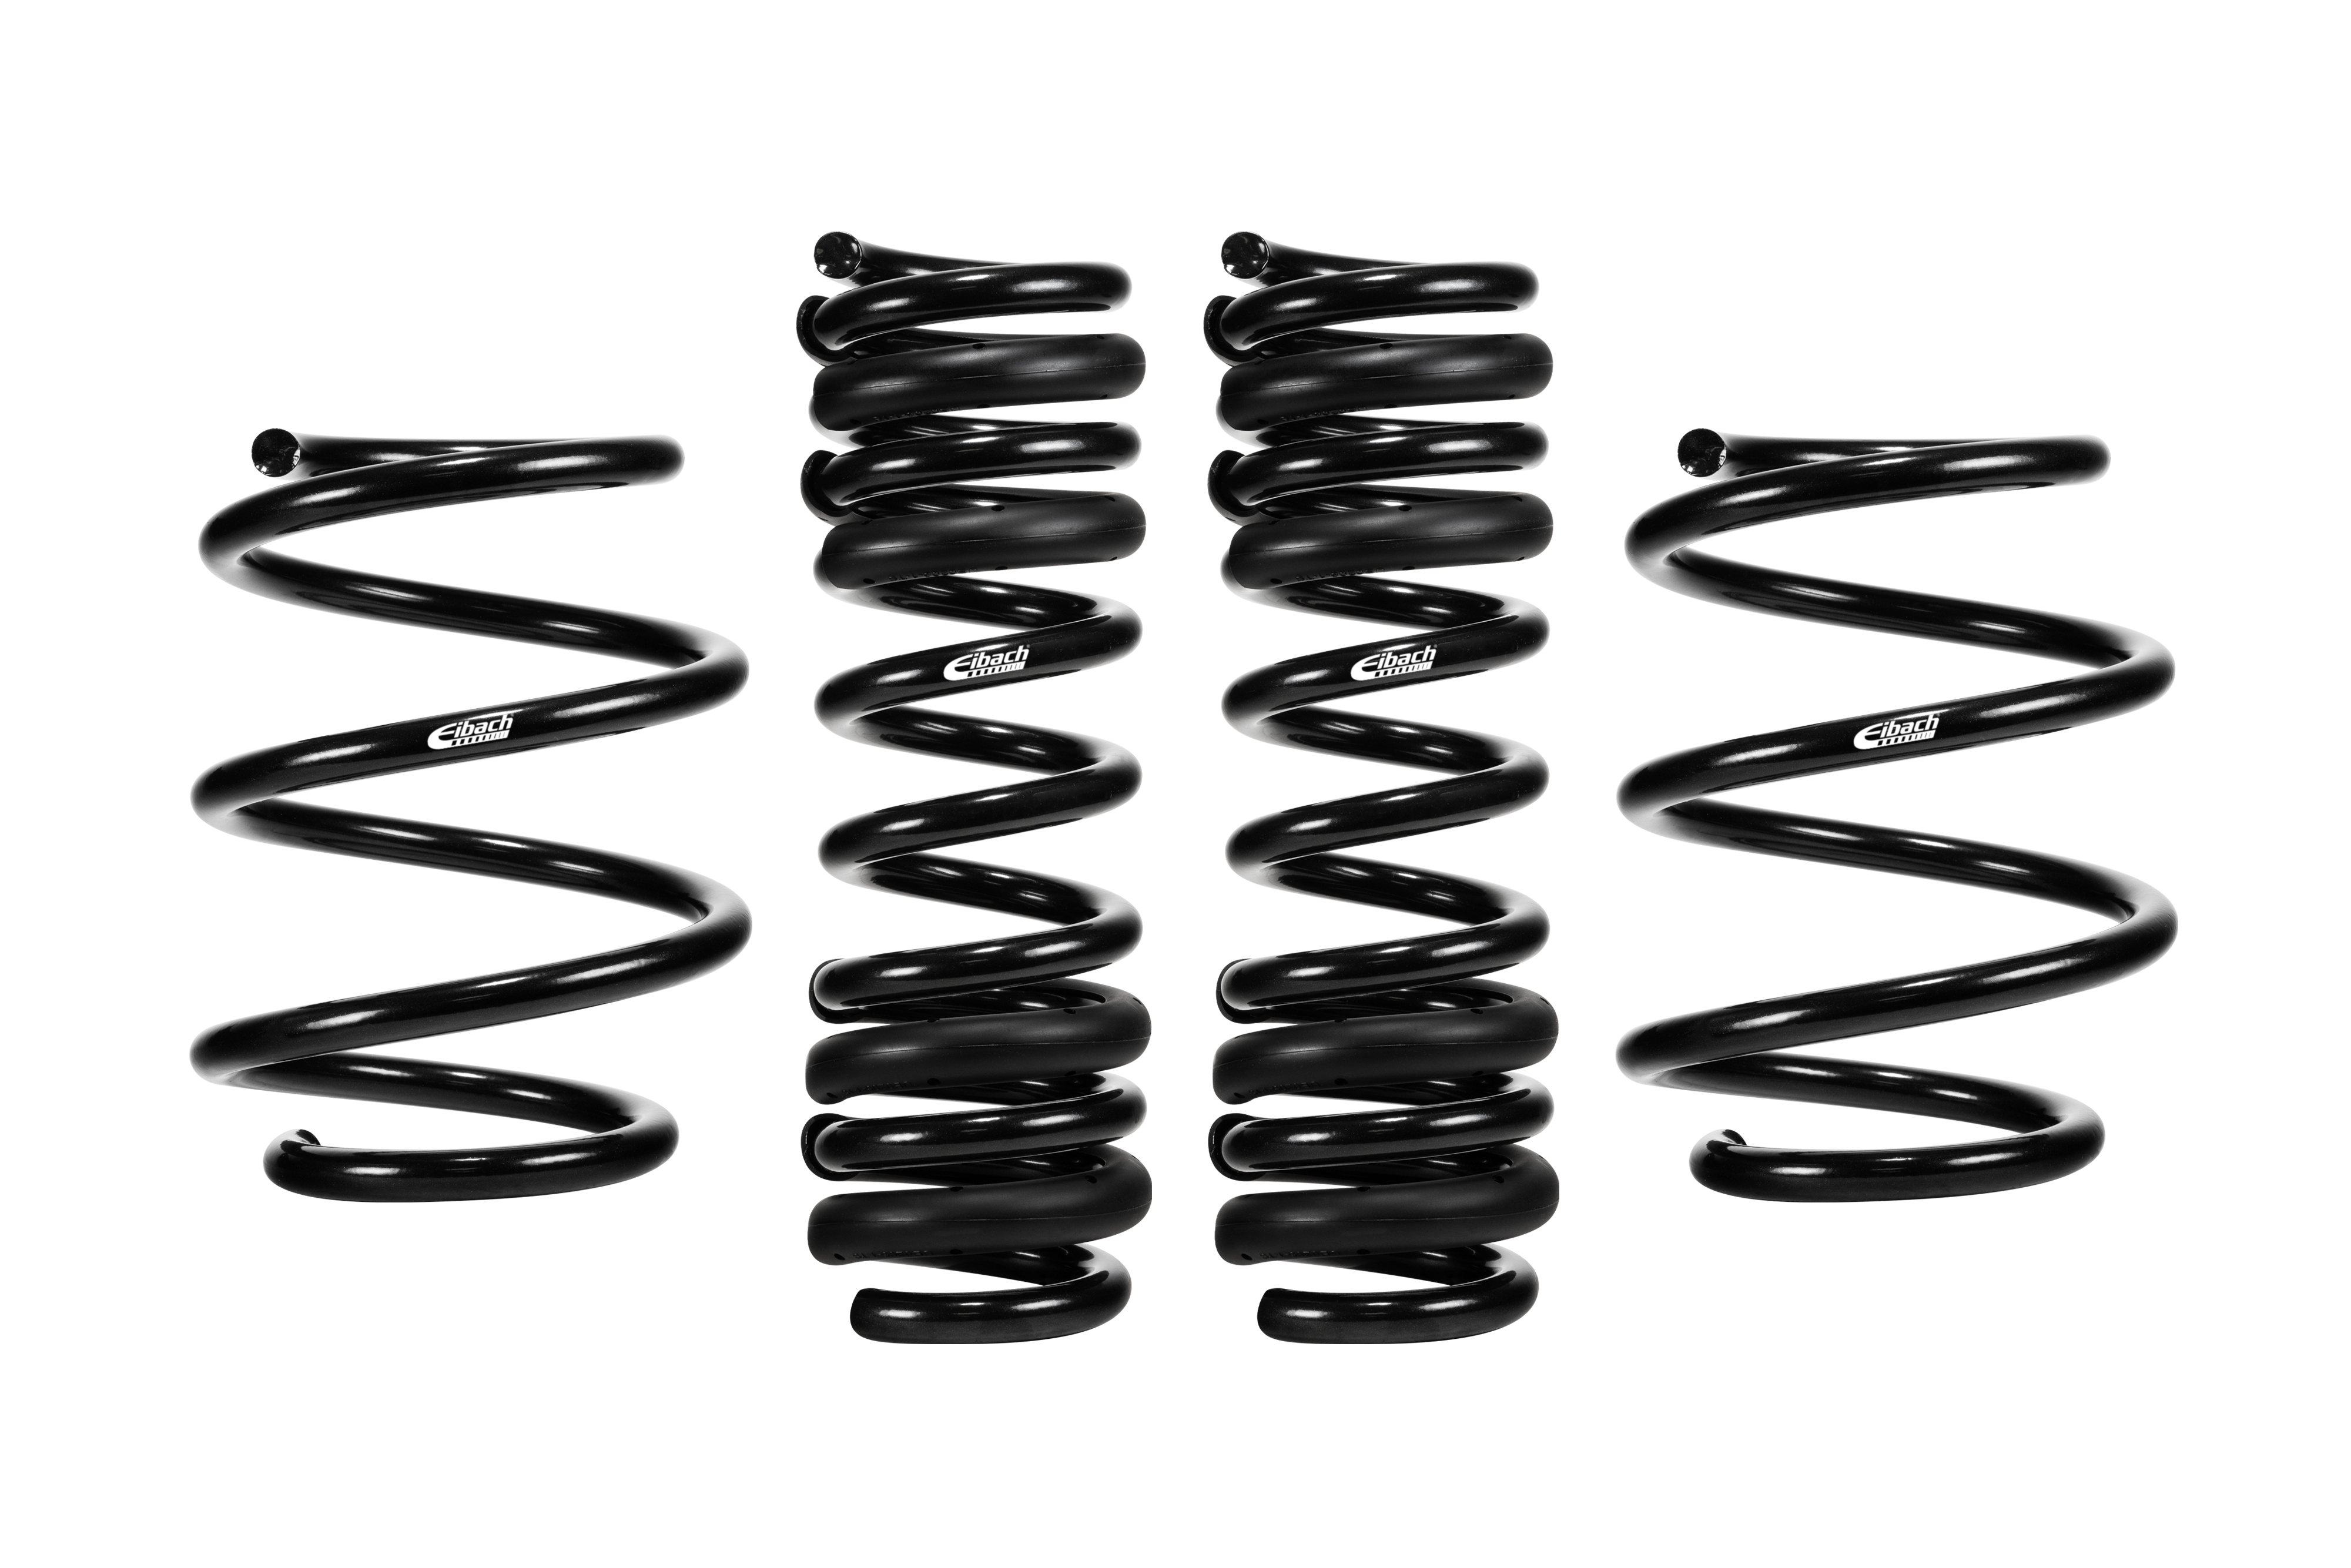 2021-2023 BMW M4 Compeition xDrive lowering springs